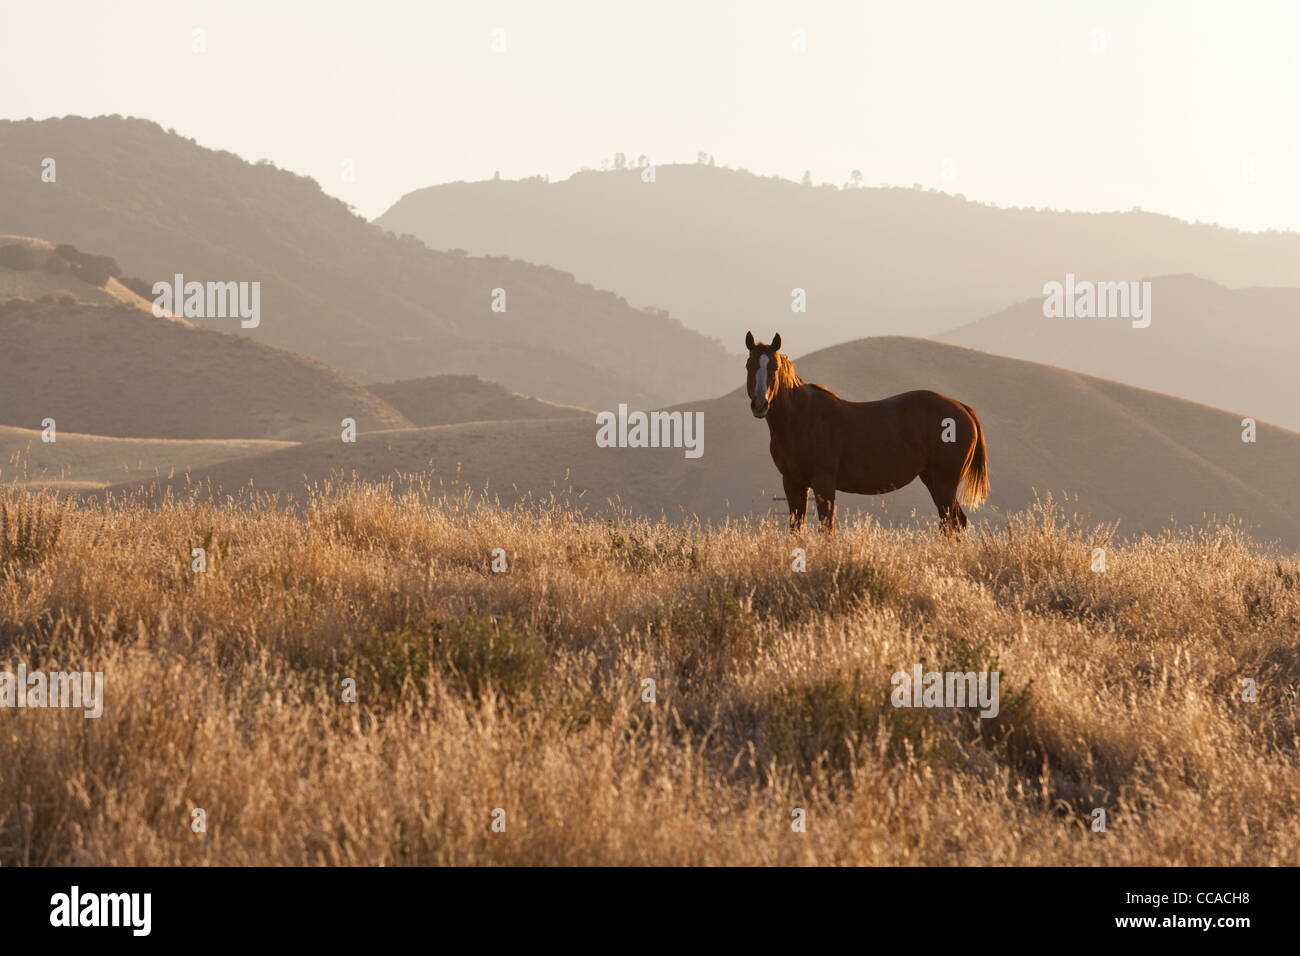 Wild horse standing on hill Stock Photo